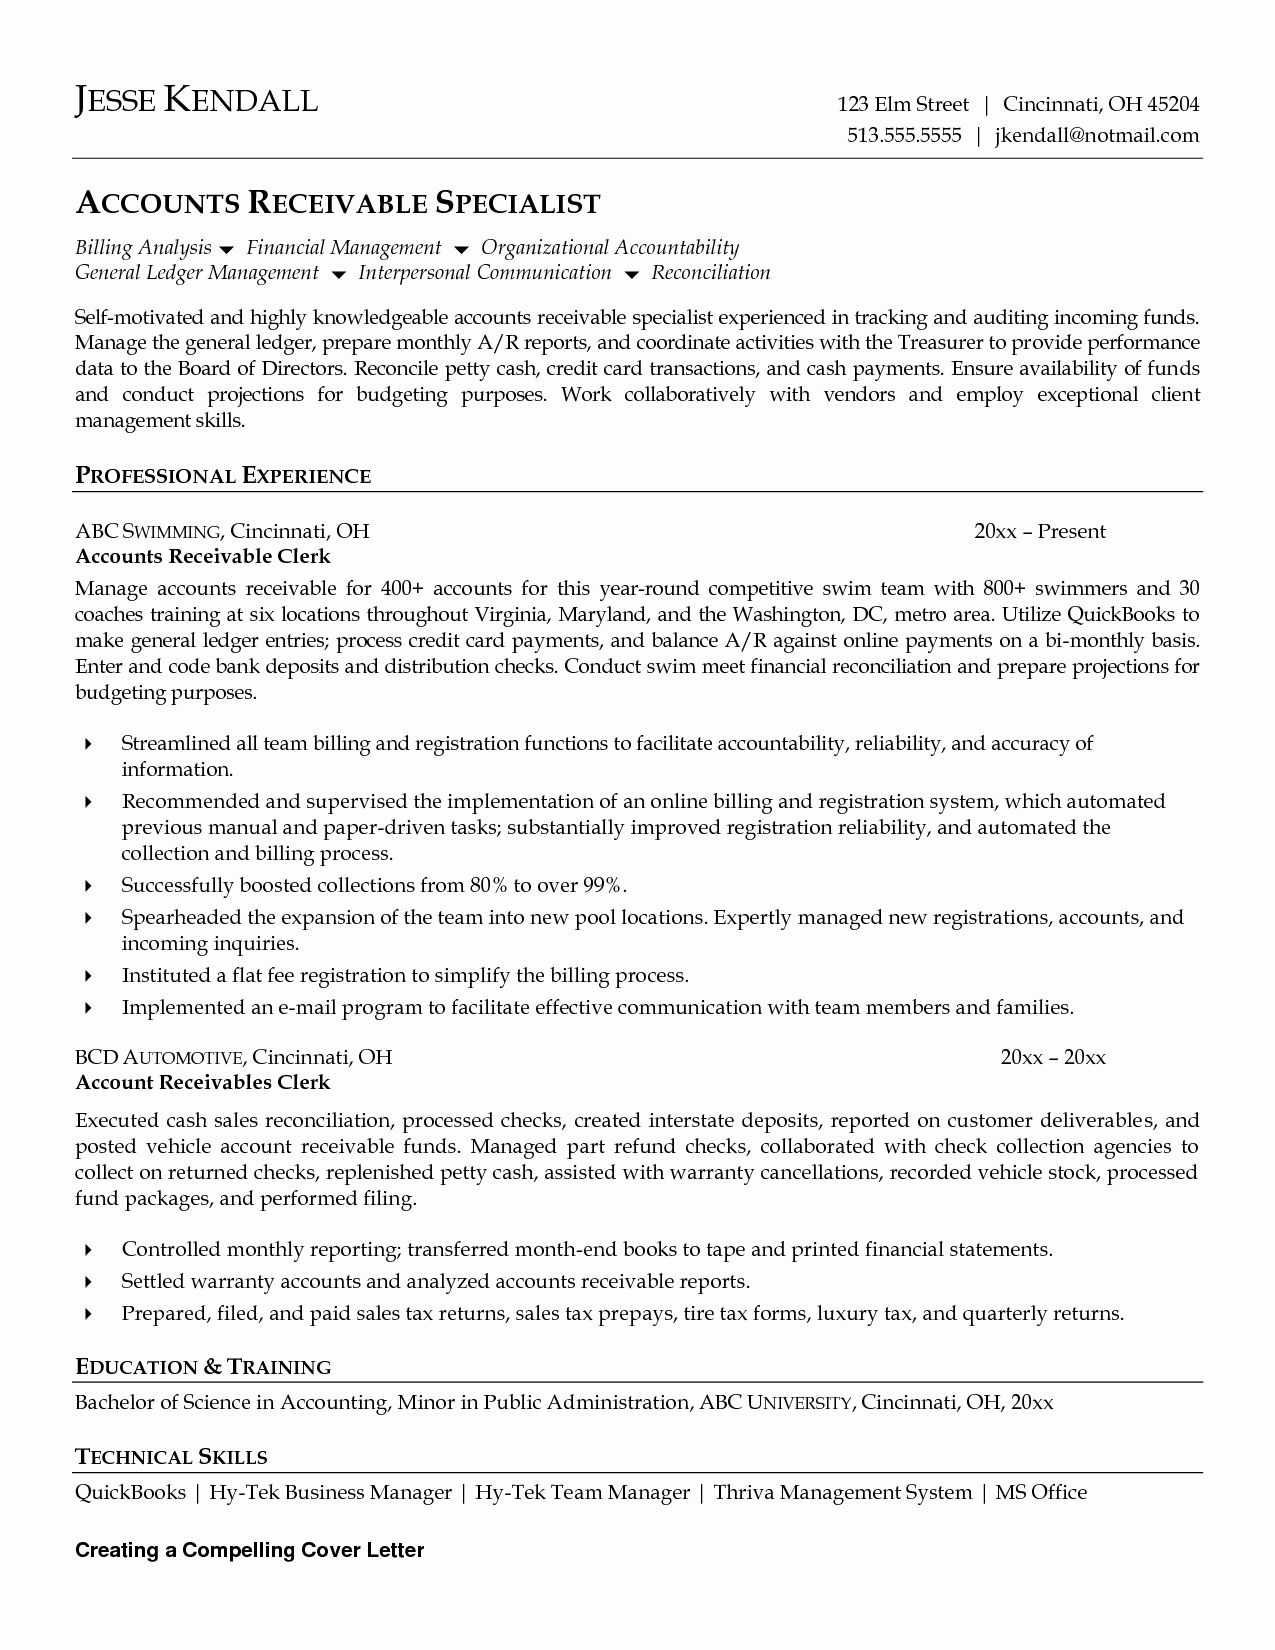 20 Accounts Receivable Manager Resume In 2020 Job intended for dimensions 1275 X 1650